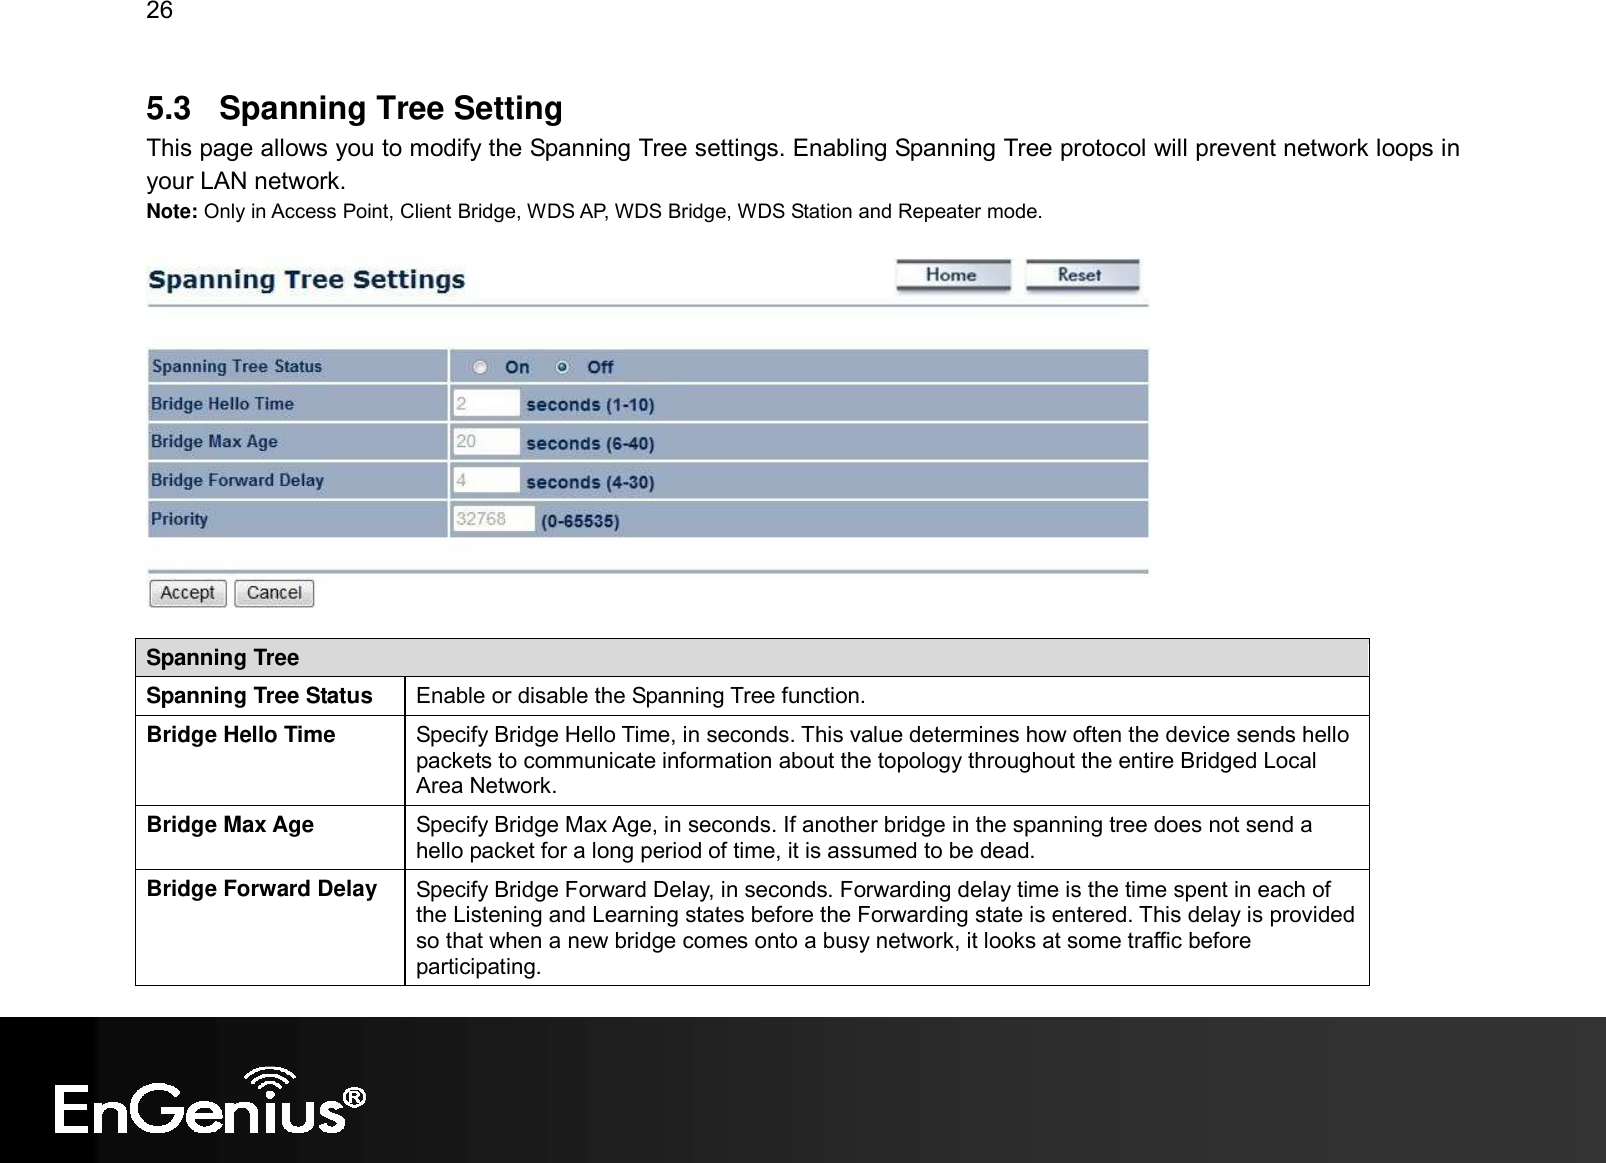 26  5.3  Spanning Tree Setting This page allows you to modify the Spanning Tree settings. Enabling Spanning Tree protocol will prevent network loops in your LAN network. Note: Only in Access Point, Client Bridge, WDS AP, WDS Bridge, WDS Station and Repeater mode.    Spanning Tree Spanning Tree Status  Enable or disable the Spanning Tree function. Bridge Hello Time  Specify Bridge Hello Time, in seconds. This value determines how often the device sends hello packets to communicate information about the topology throughout the entire Bridged Local Area Network. Bridge Max Age  Specify Bridge Max Age, in seconds. If another bridge in the spanning tree does not send a hello packet for a long period of time, it is assumed to be dead. Bridge Forward Delay  Specify Bridge Forward Delay, in seconds. Forwarding delay time is the time spent in each of the Listening and Learning states before the Forwarding state is entered. This delay is provided so that when a new bridge comes onto a busy network, it looks at some traffic before participating. 